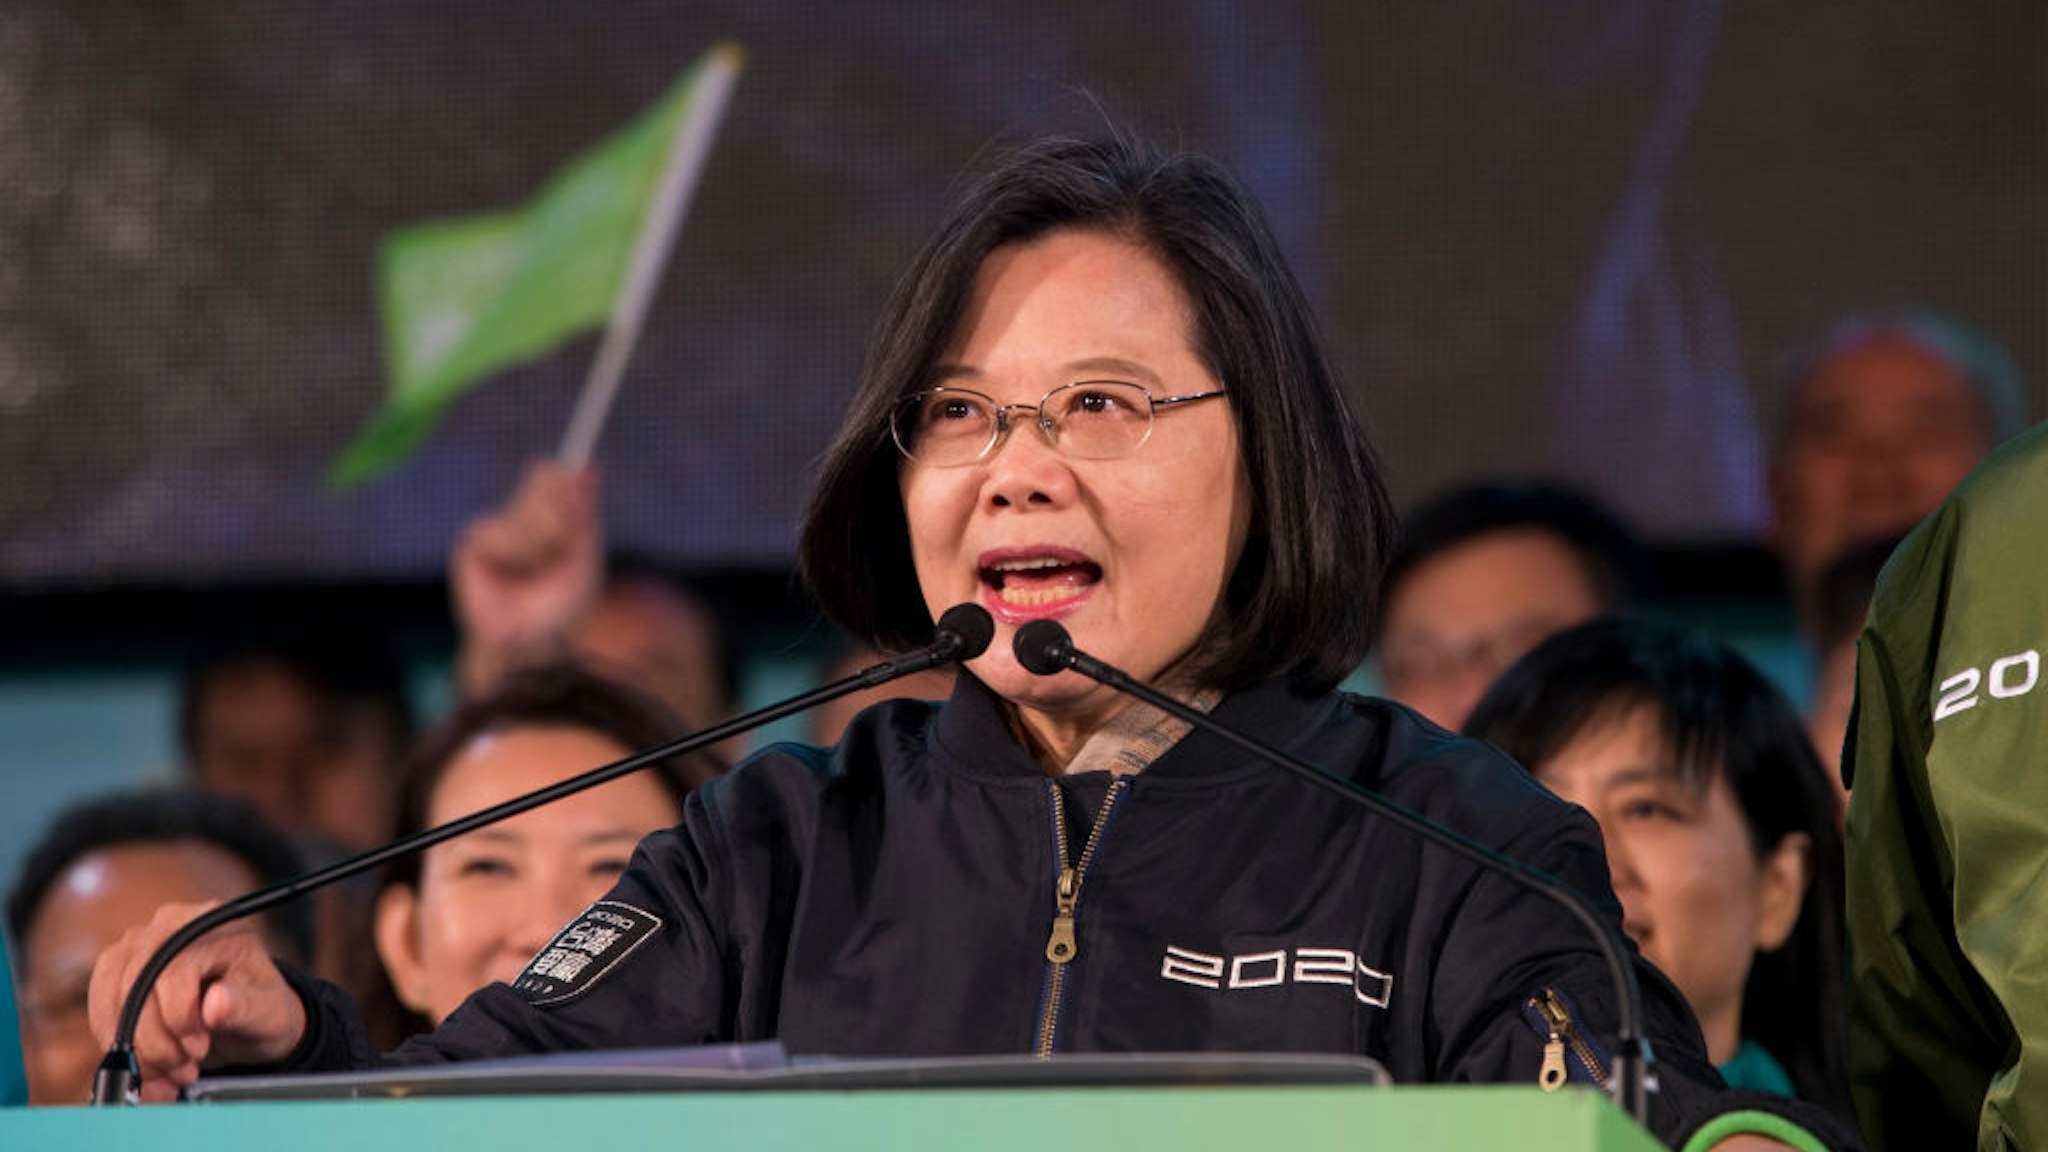 Taiwanese President, Tsai Ing Wen on stage speaking during an election campaign. President Tsai Ing-wen of the ruling Democratic Progressive Party (DPP), continues on her campaign tour for her second term running.